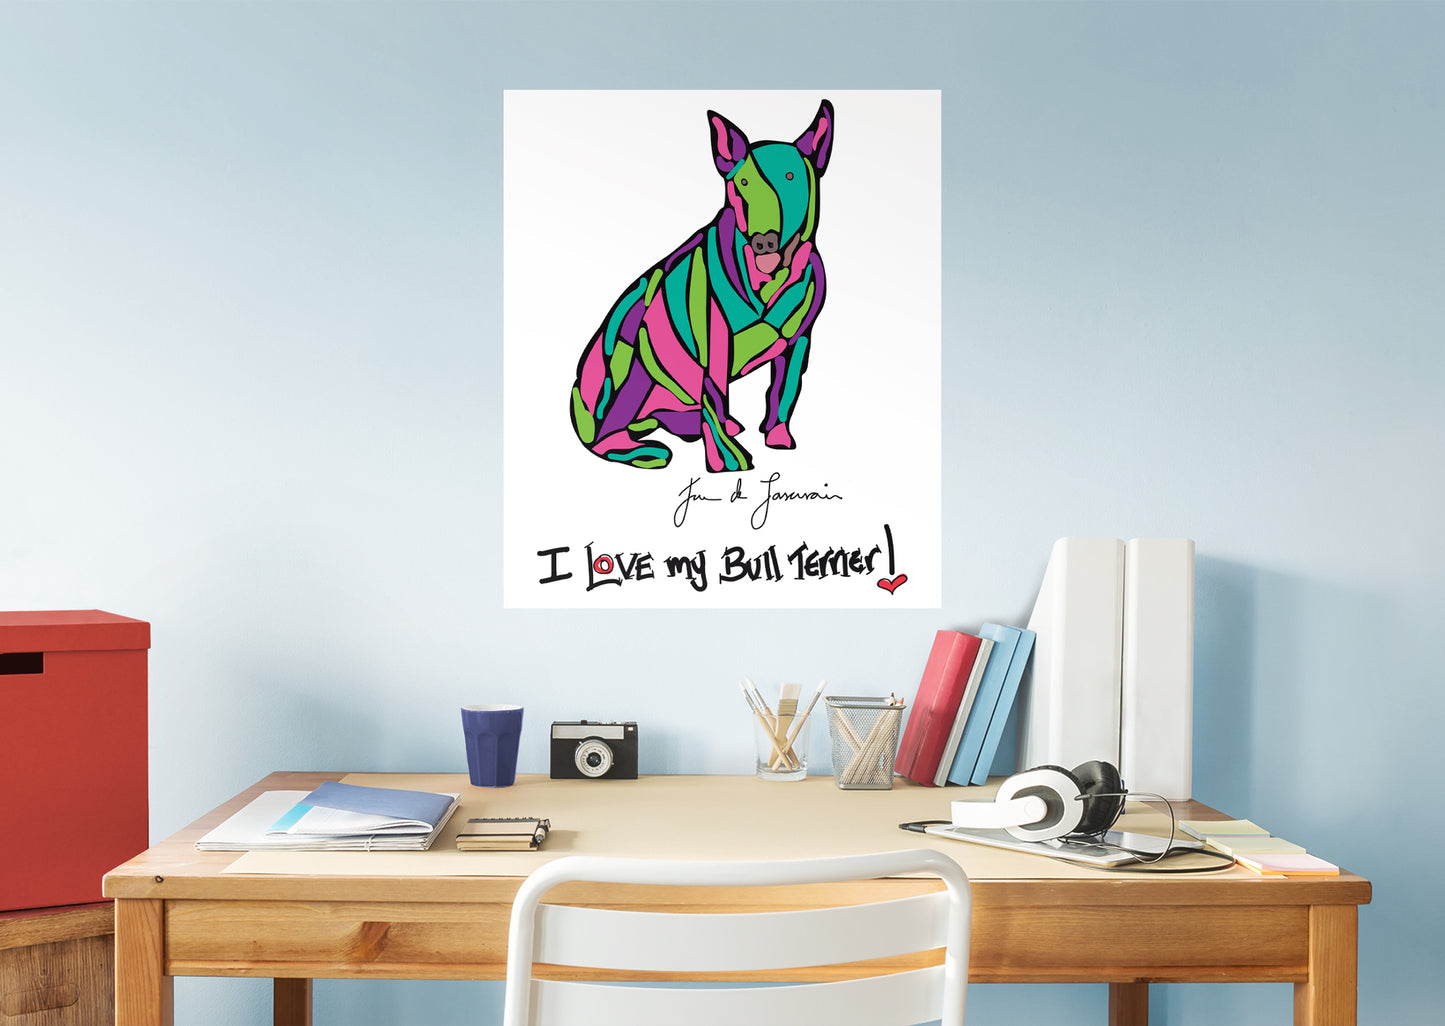 Dream Big Art:  I Love My Bull Terrier Mural        - Officially Licensed Juan de Lascurain Removable Wall   Adhesive Decal